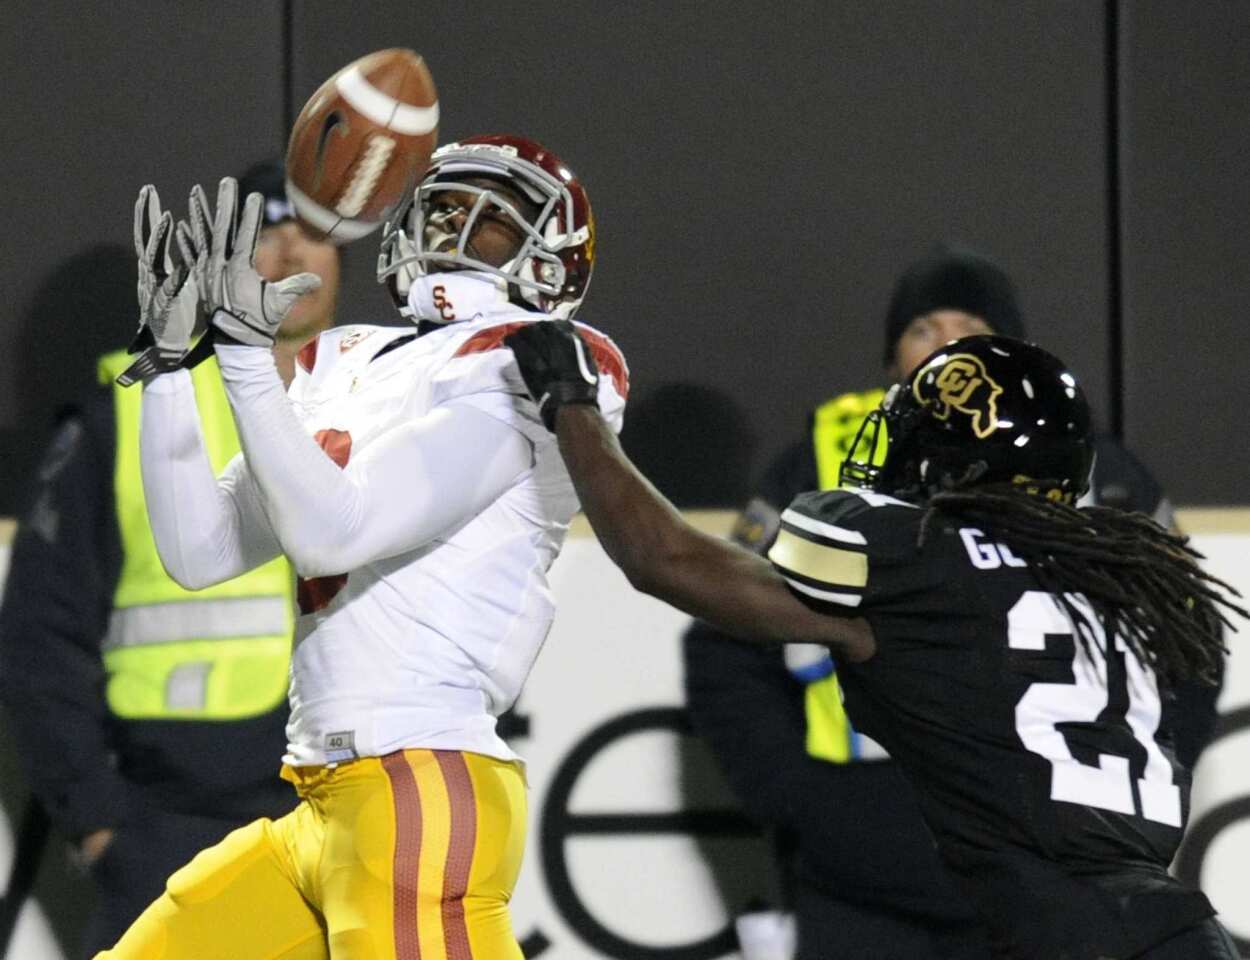 USC receiver Marqise Lee hauls in a 33-yard scoring strike against Colorado defensive back Jered Bell in the first quarter Friday night.